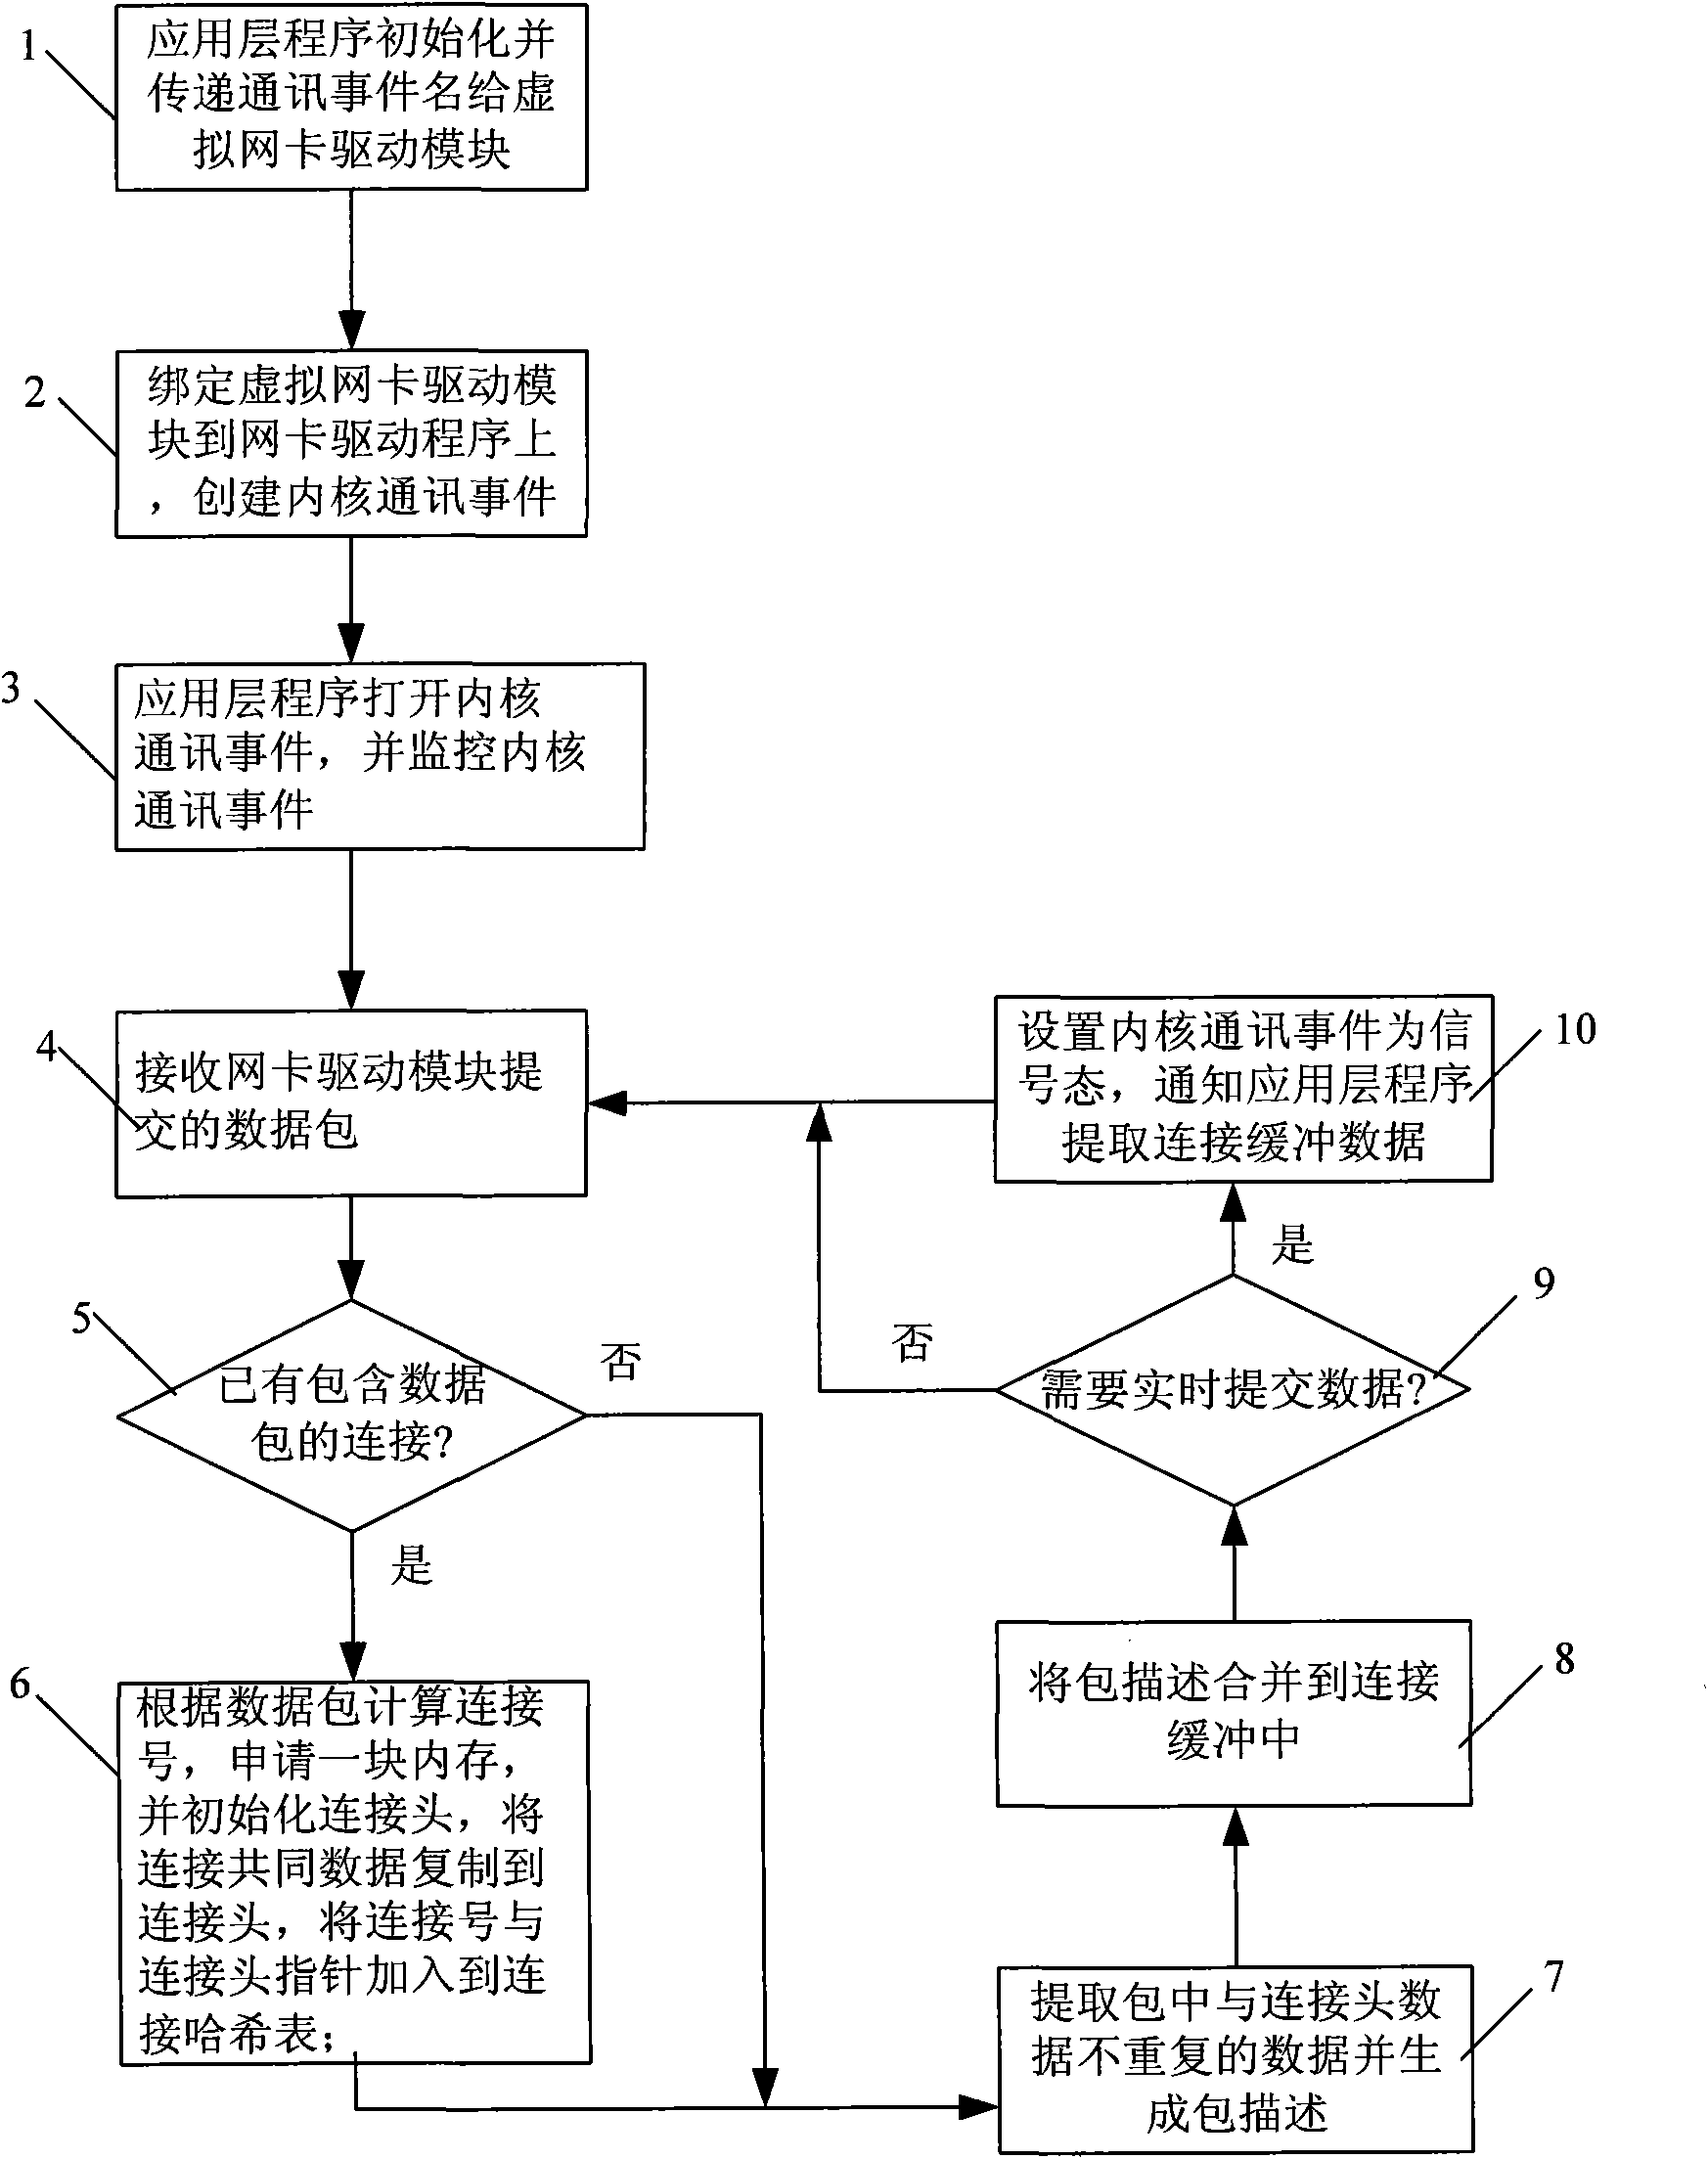 Real-time network data capture method based on connection